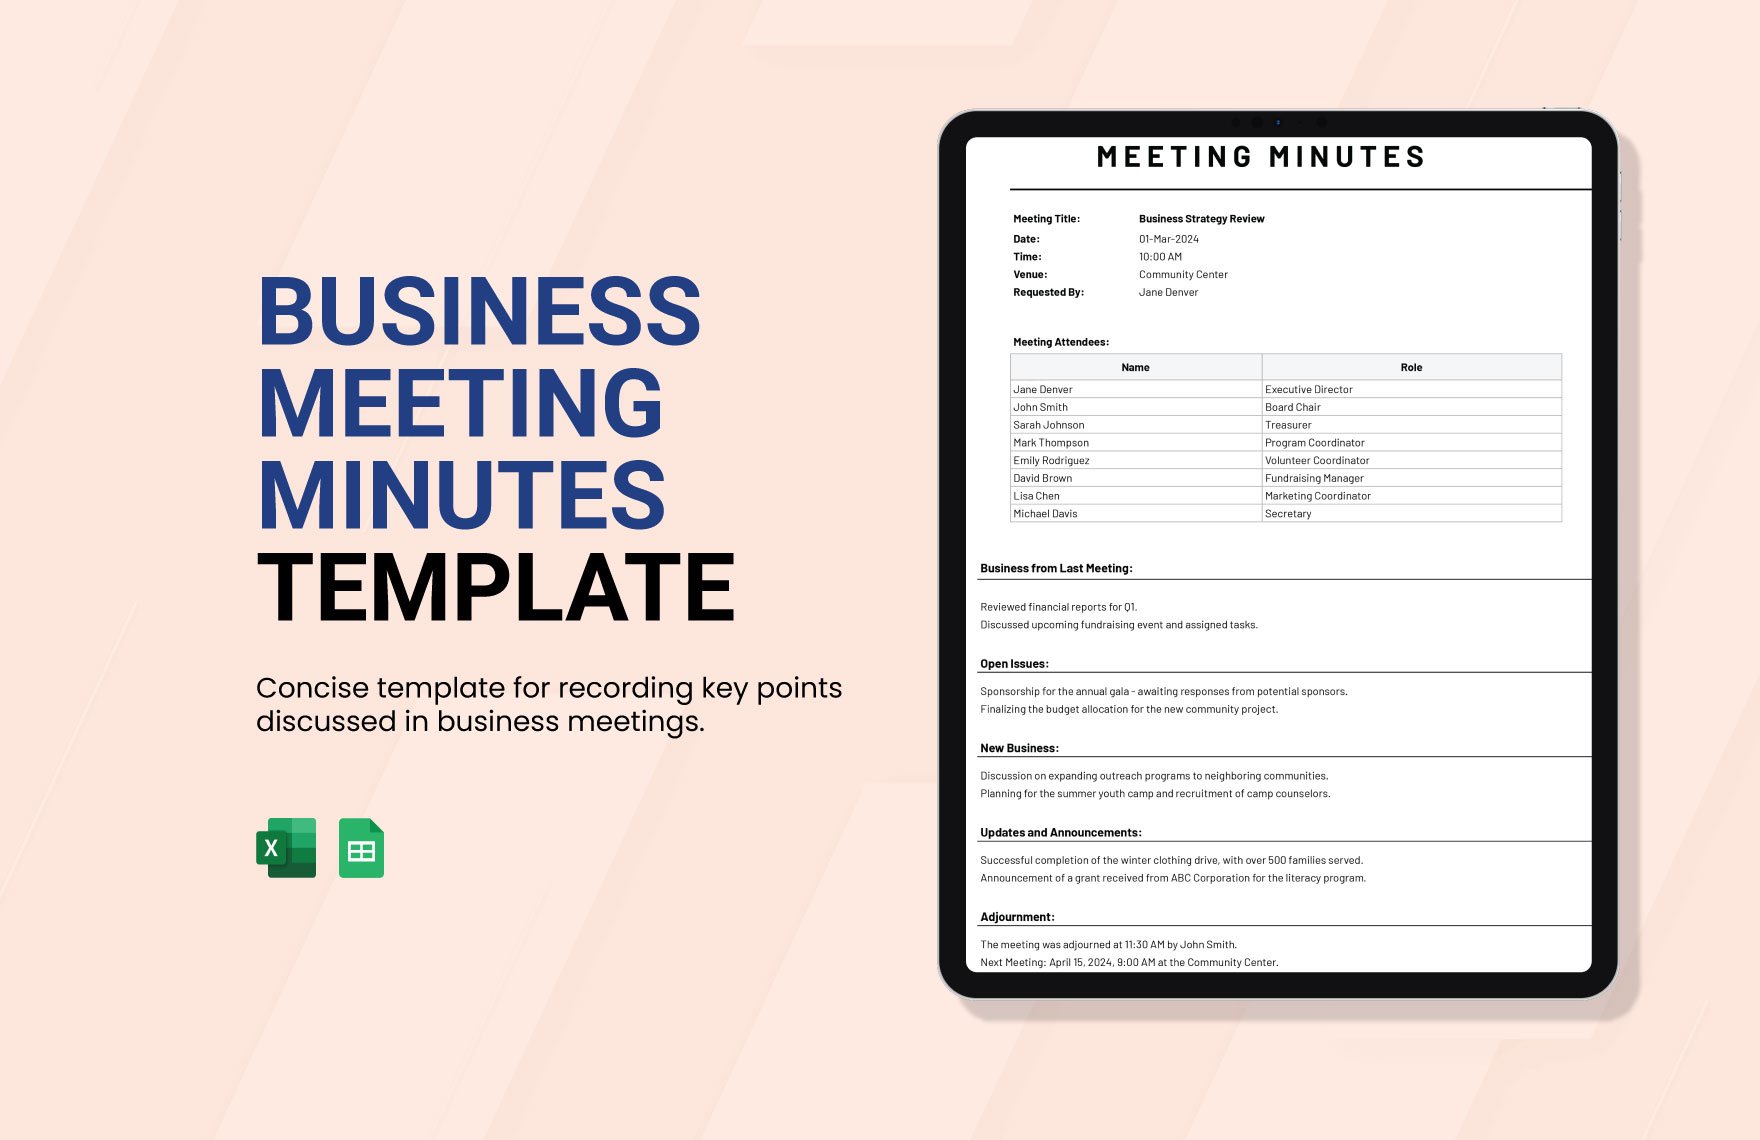 Business Meeting Minutes Template in Excel, Google Sheets